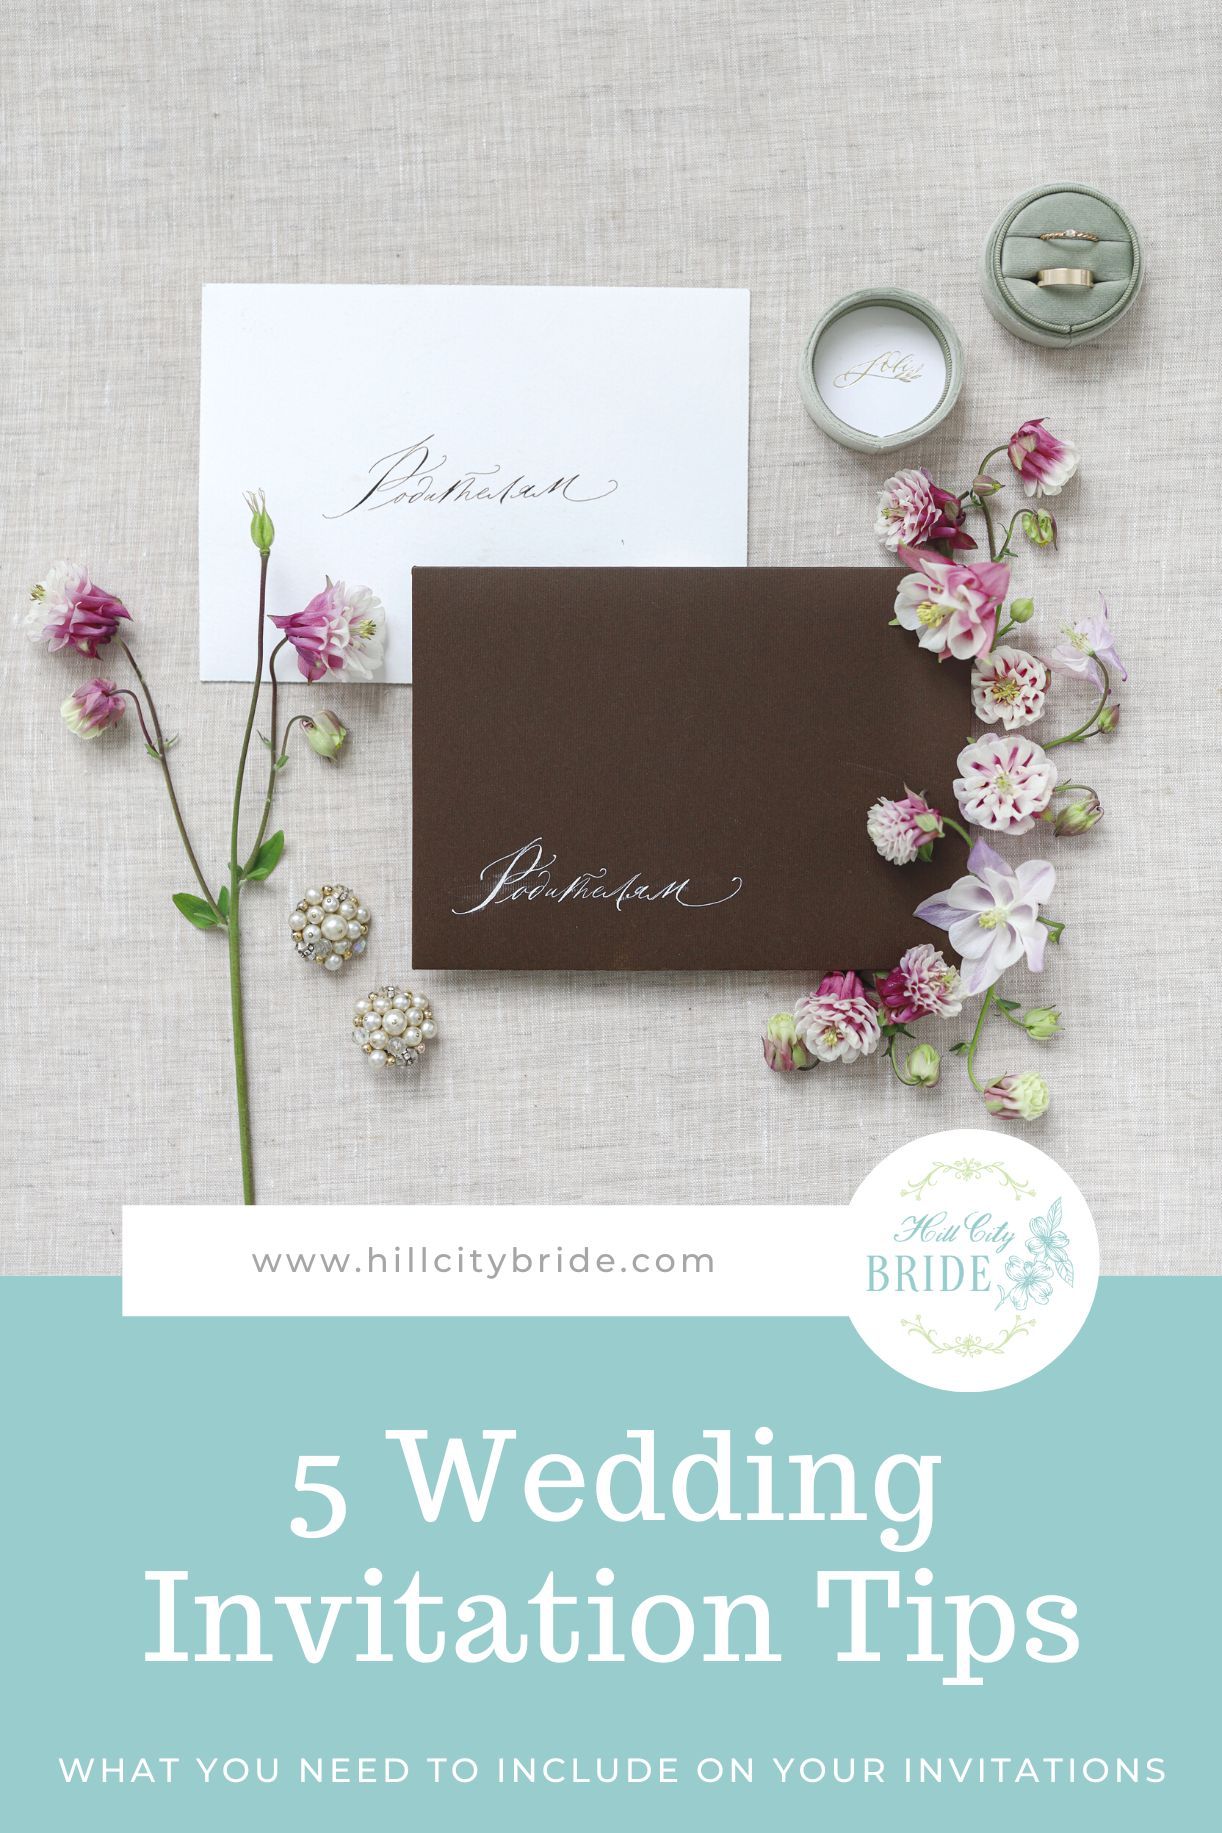 Things to Include on Your Wedding Invitations